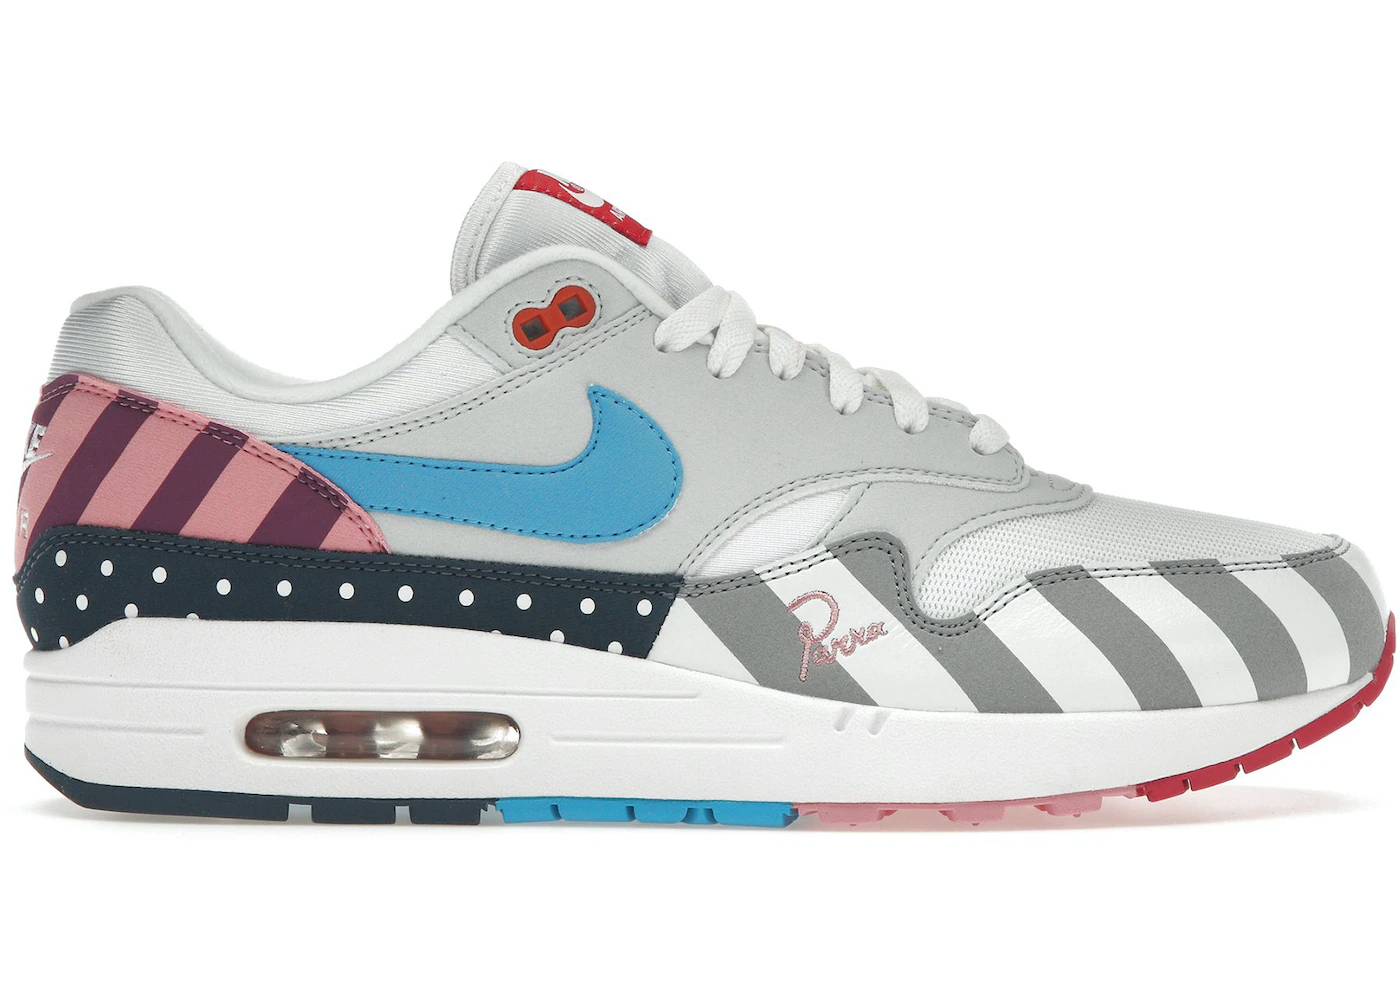 alliance Inflate Gymnast Nike Air Max 1 Parra (2018) - AT3057-100 - US